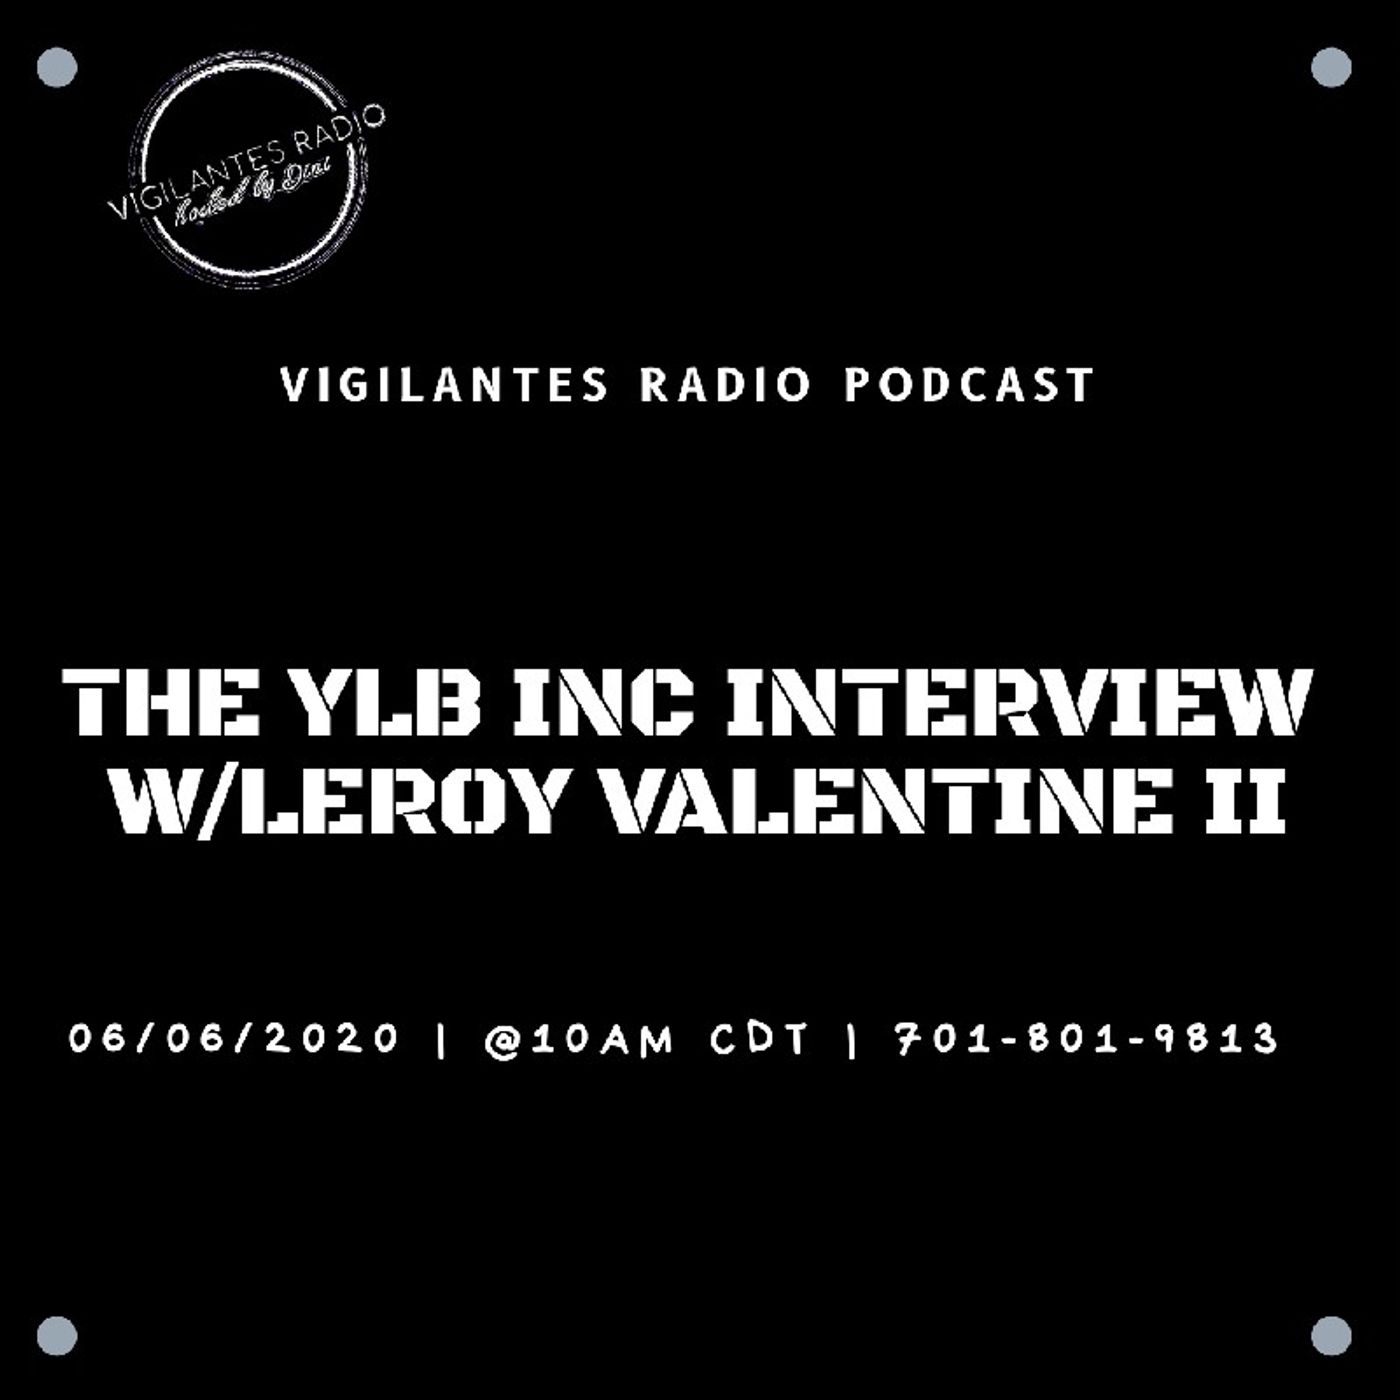 The YLB Incorporated Interview w/Leroy Valentine II. Image